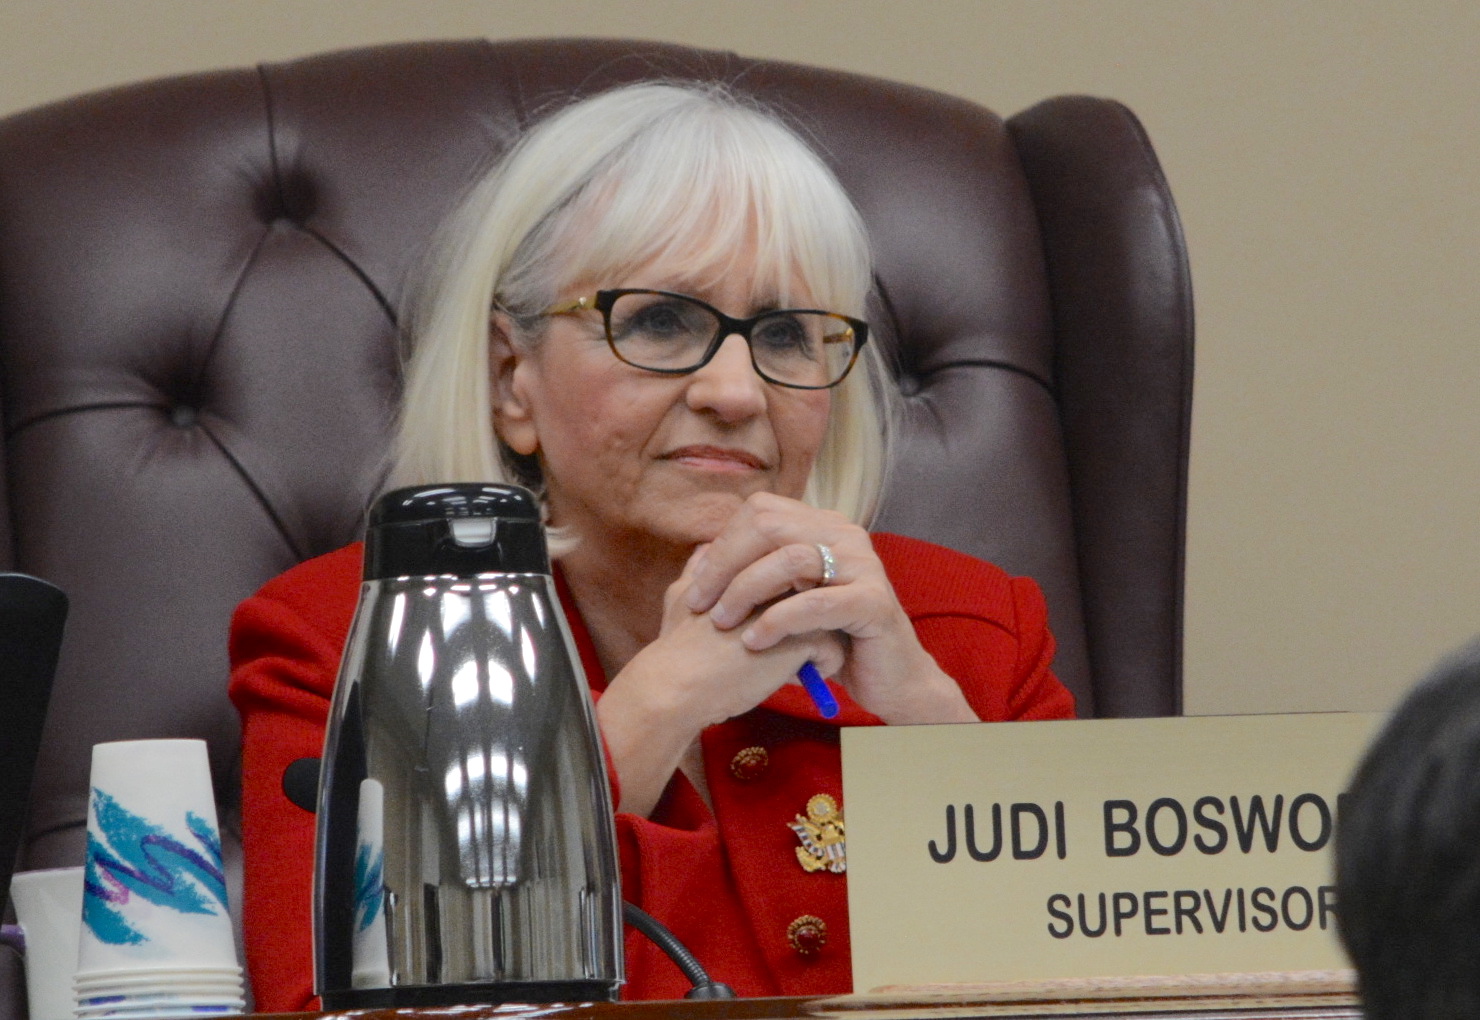 Town of North Hempstead Supervisor Judi Bosworth listens as a resident speaks at a town board meeting. (Photo by Janelle Clausen)